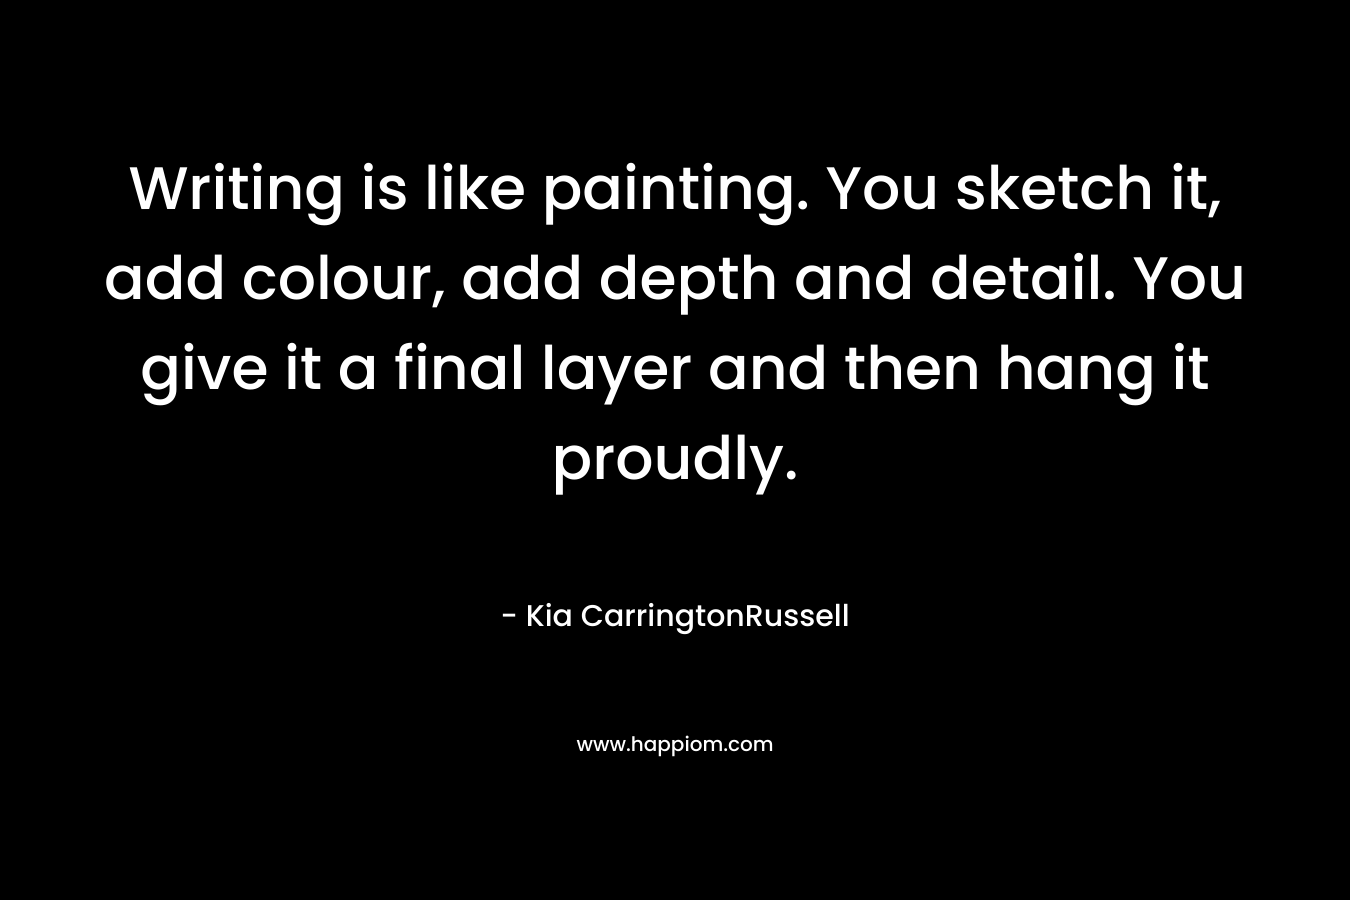 Writing is like painting. You sketch it, add colour, add depth and detail. You give it a final layer and then hang it proudly.